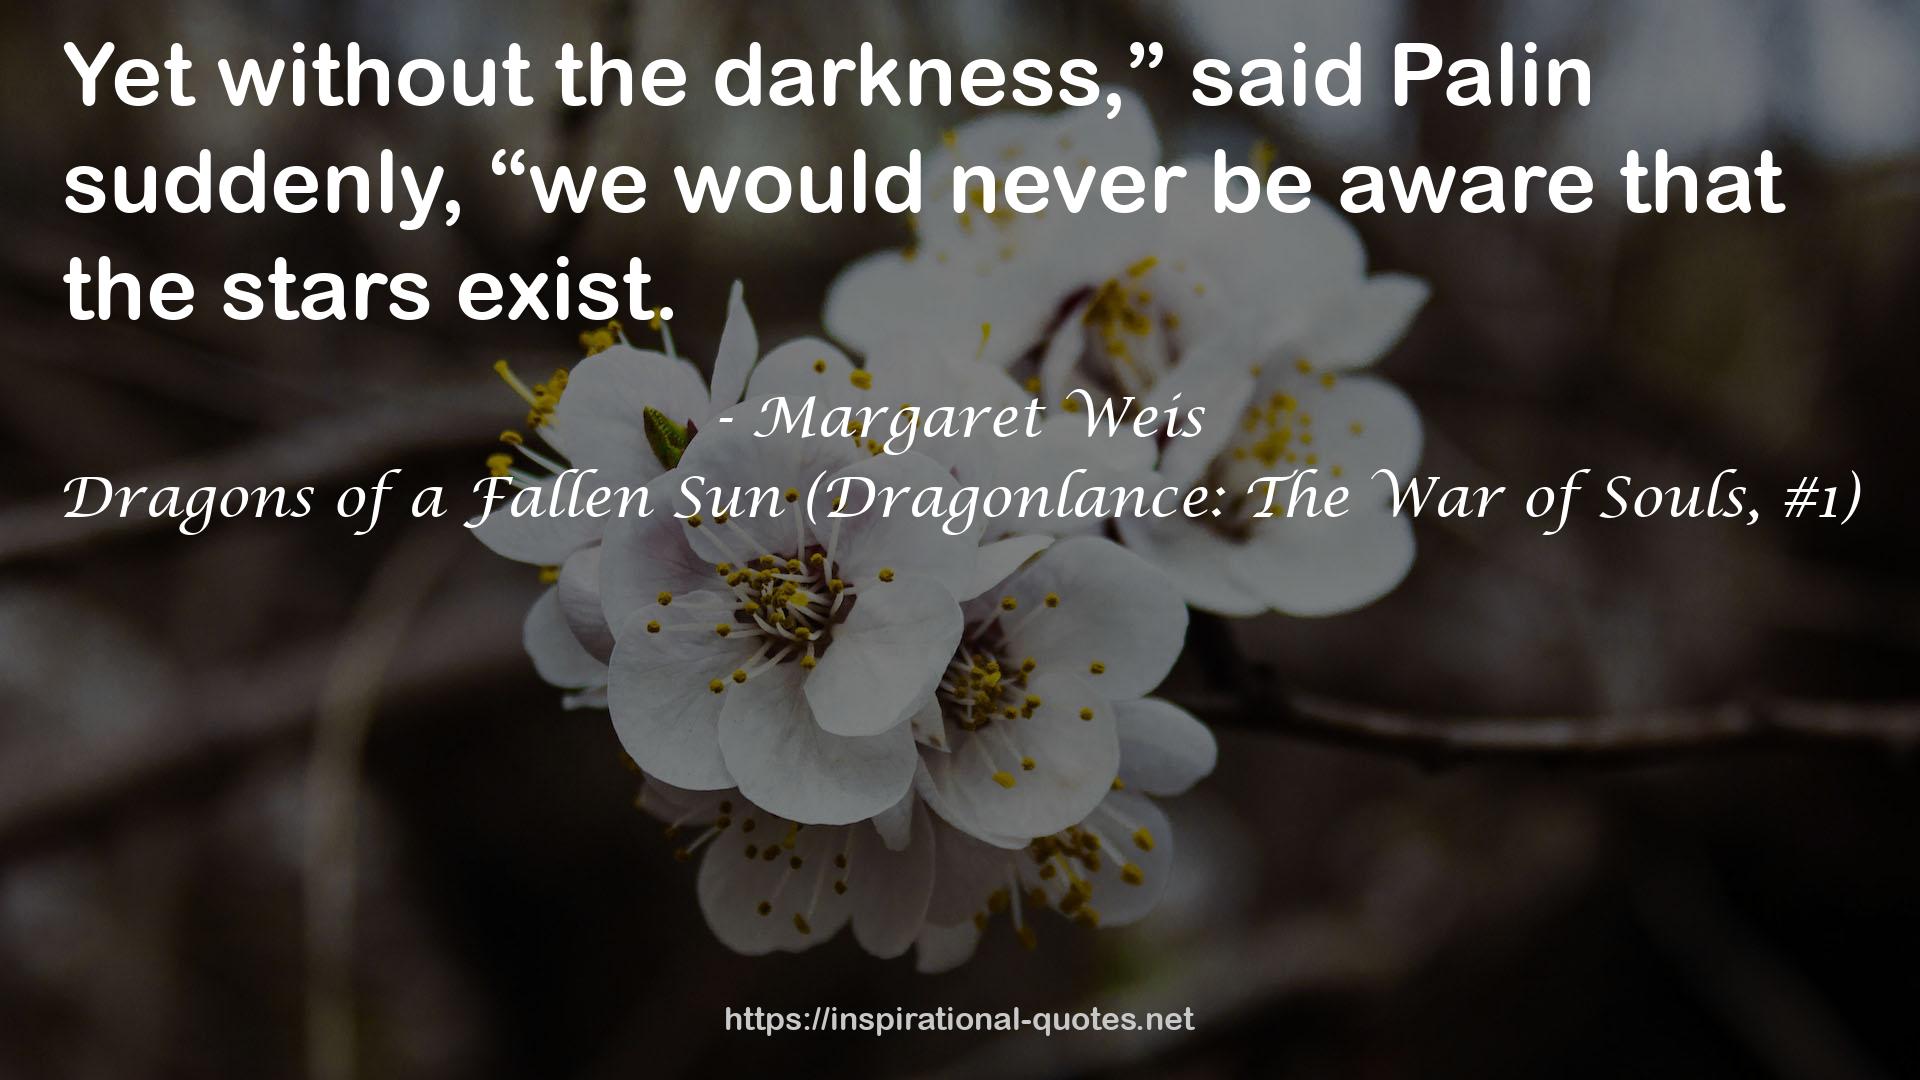 Dragons of a Fallen Sun (Dragonlance: The War of Souls, #1) QUOTES